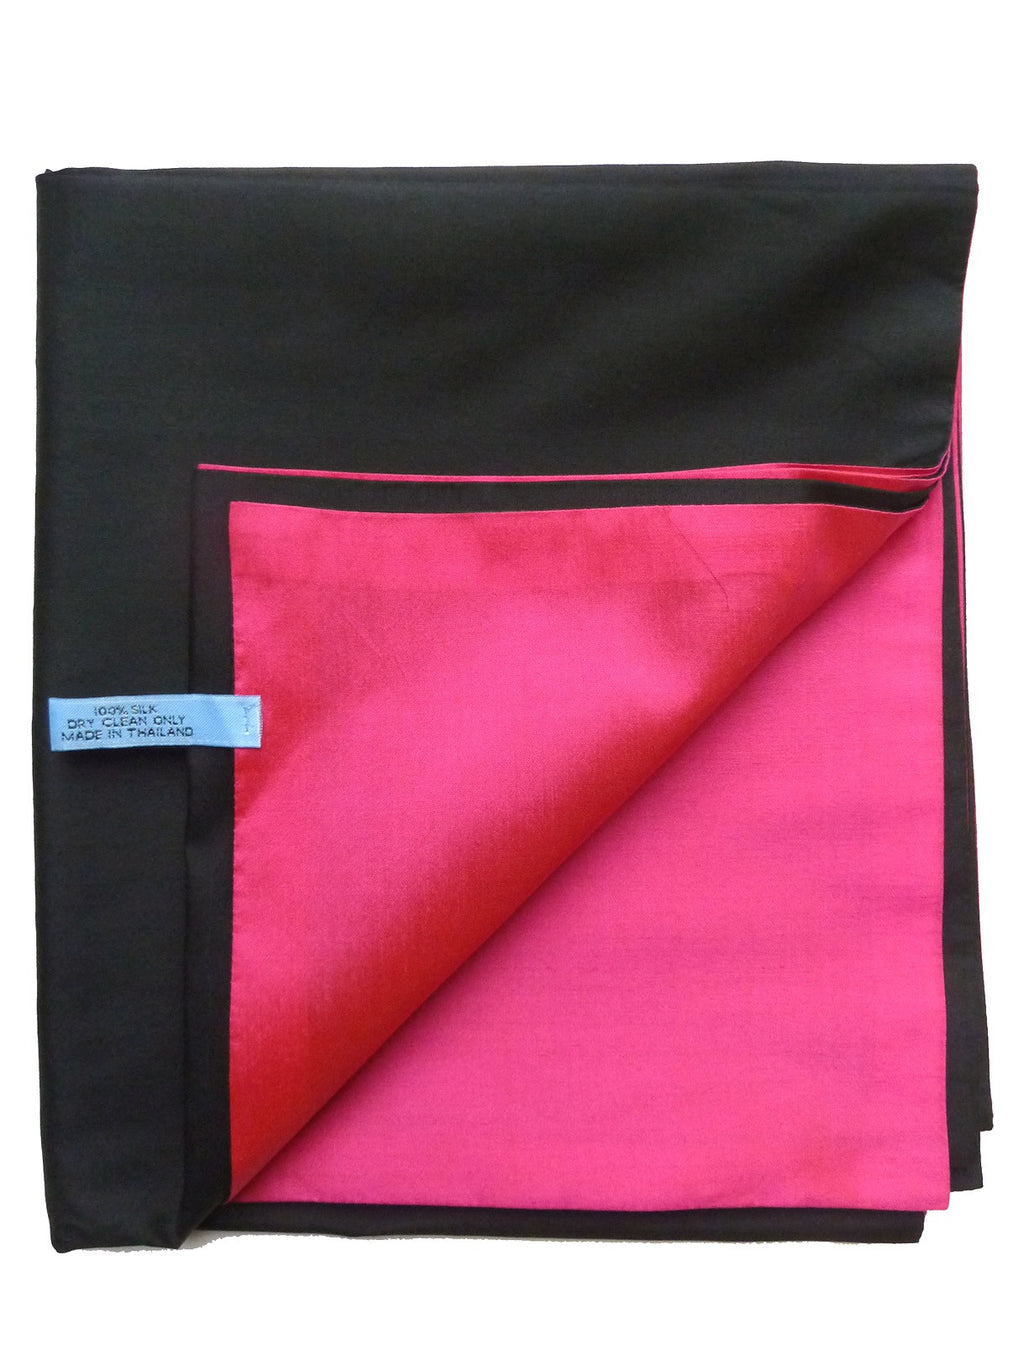 Double Sided Evening Shawl Black Combinations